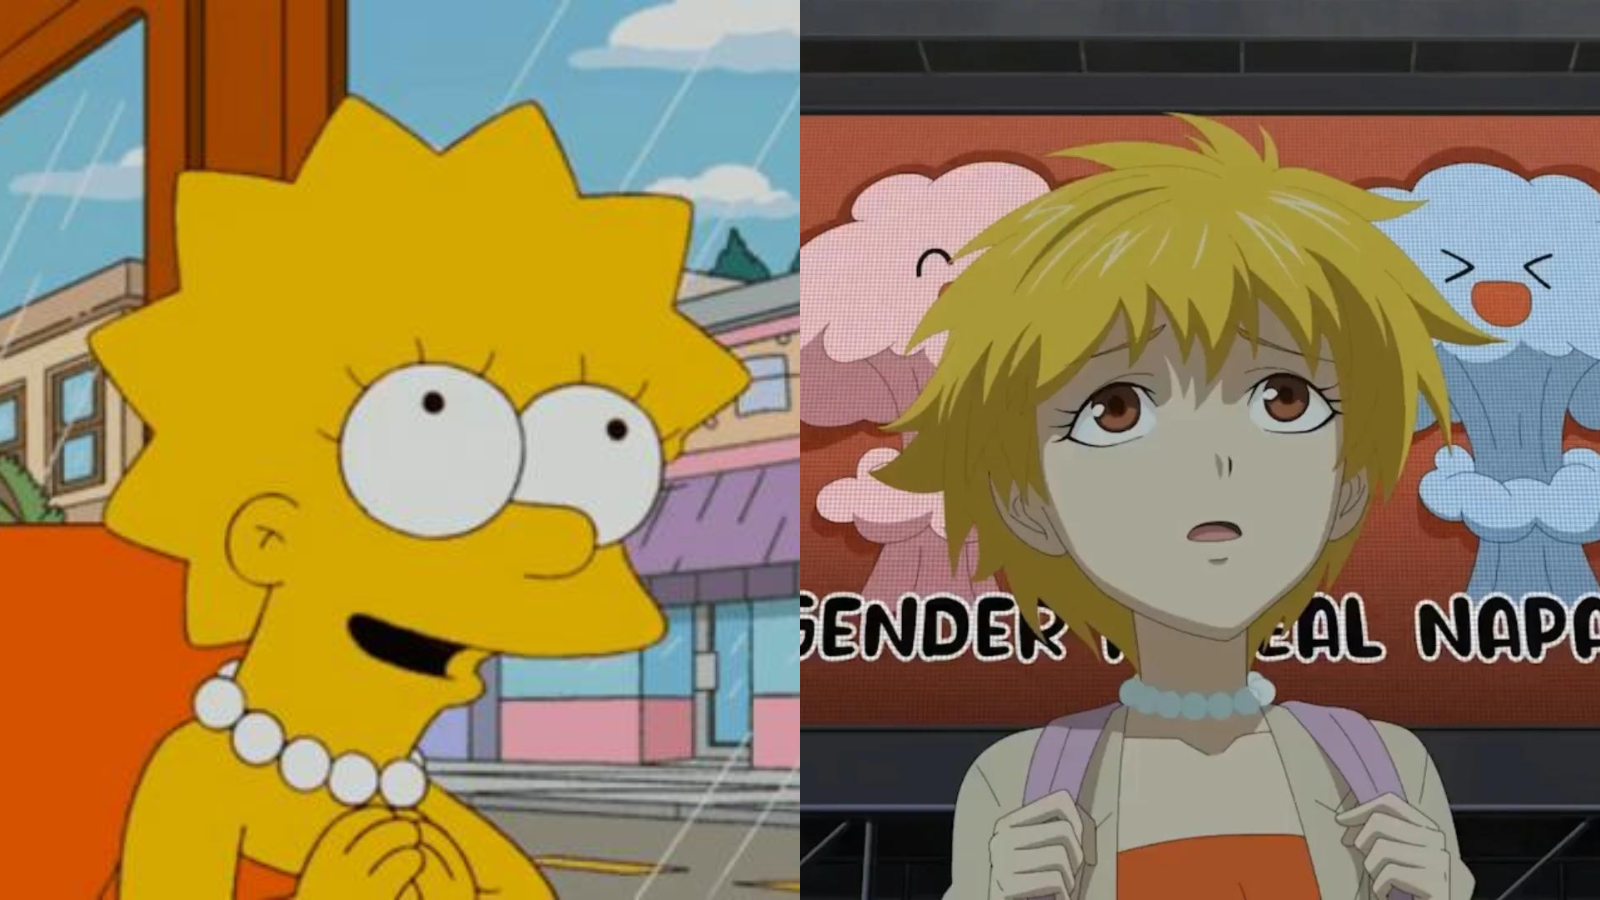 Here's How 'The Simpsons' Characters Would Look in the World of Anime